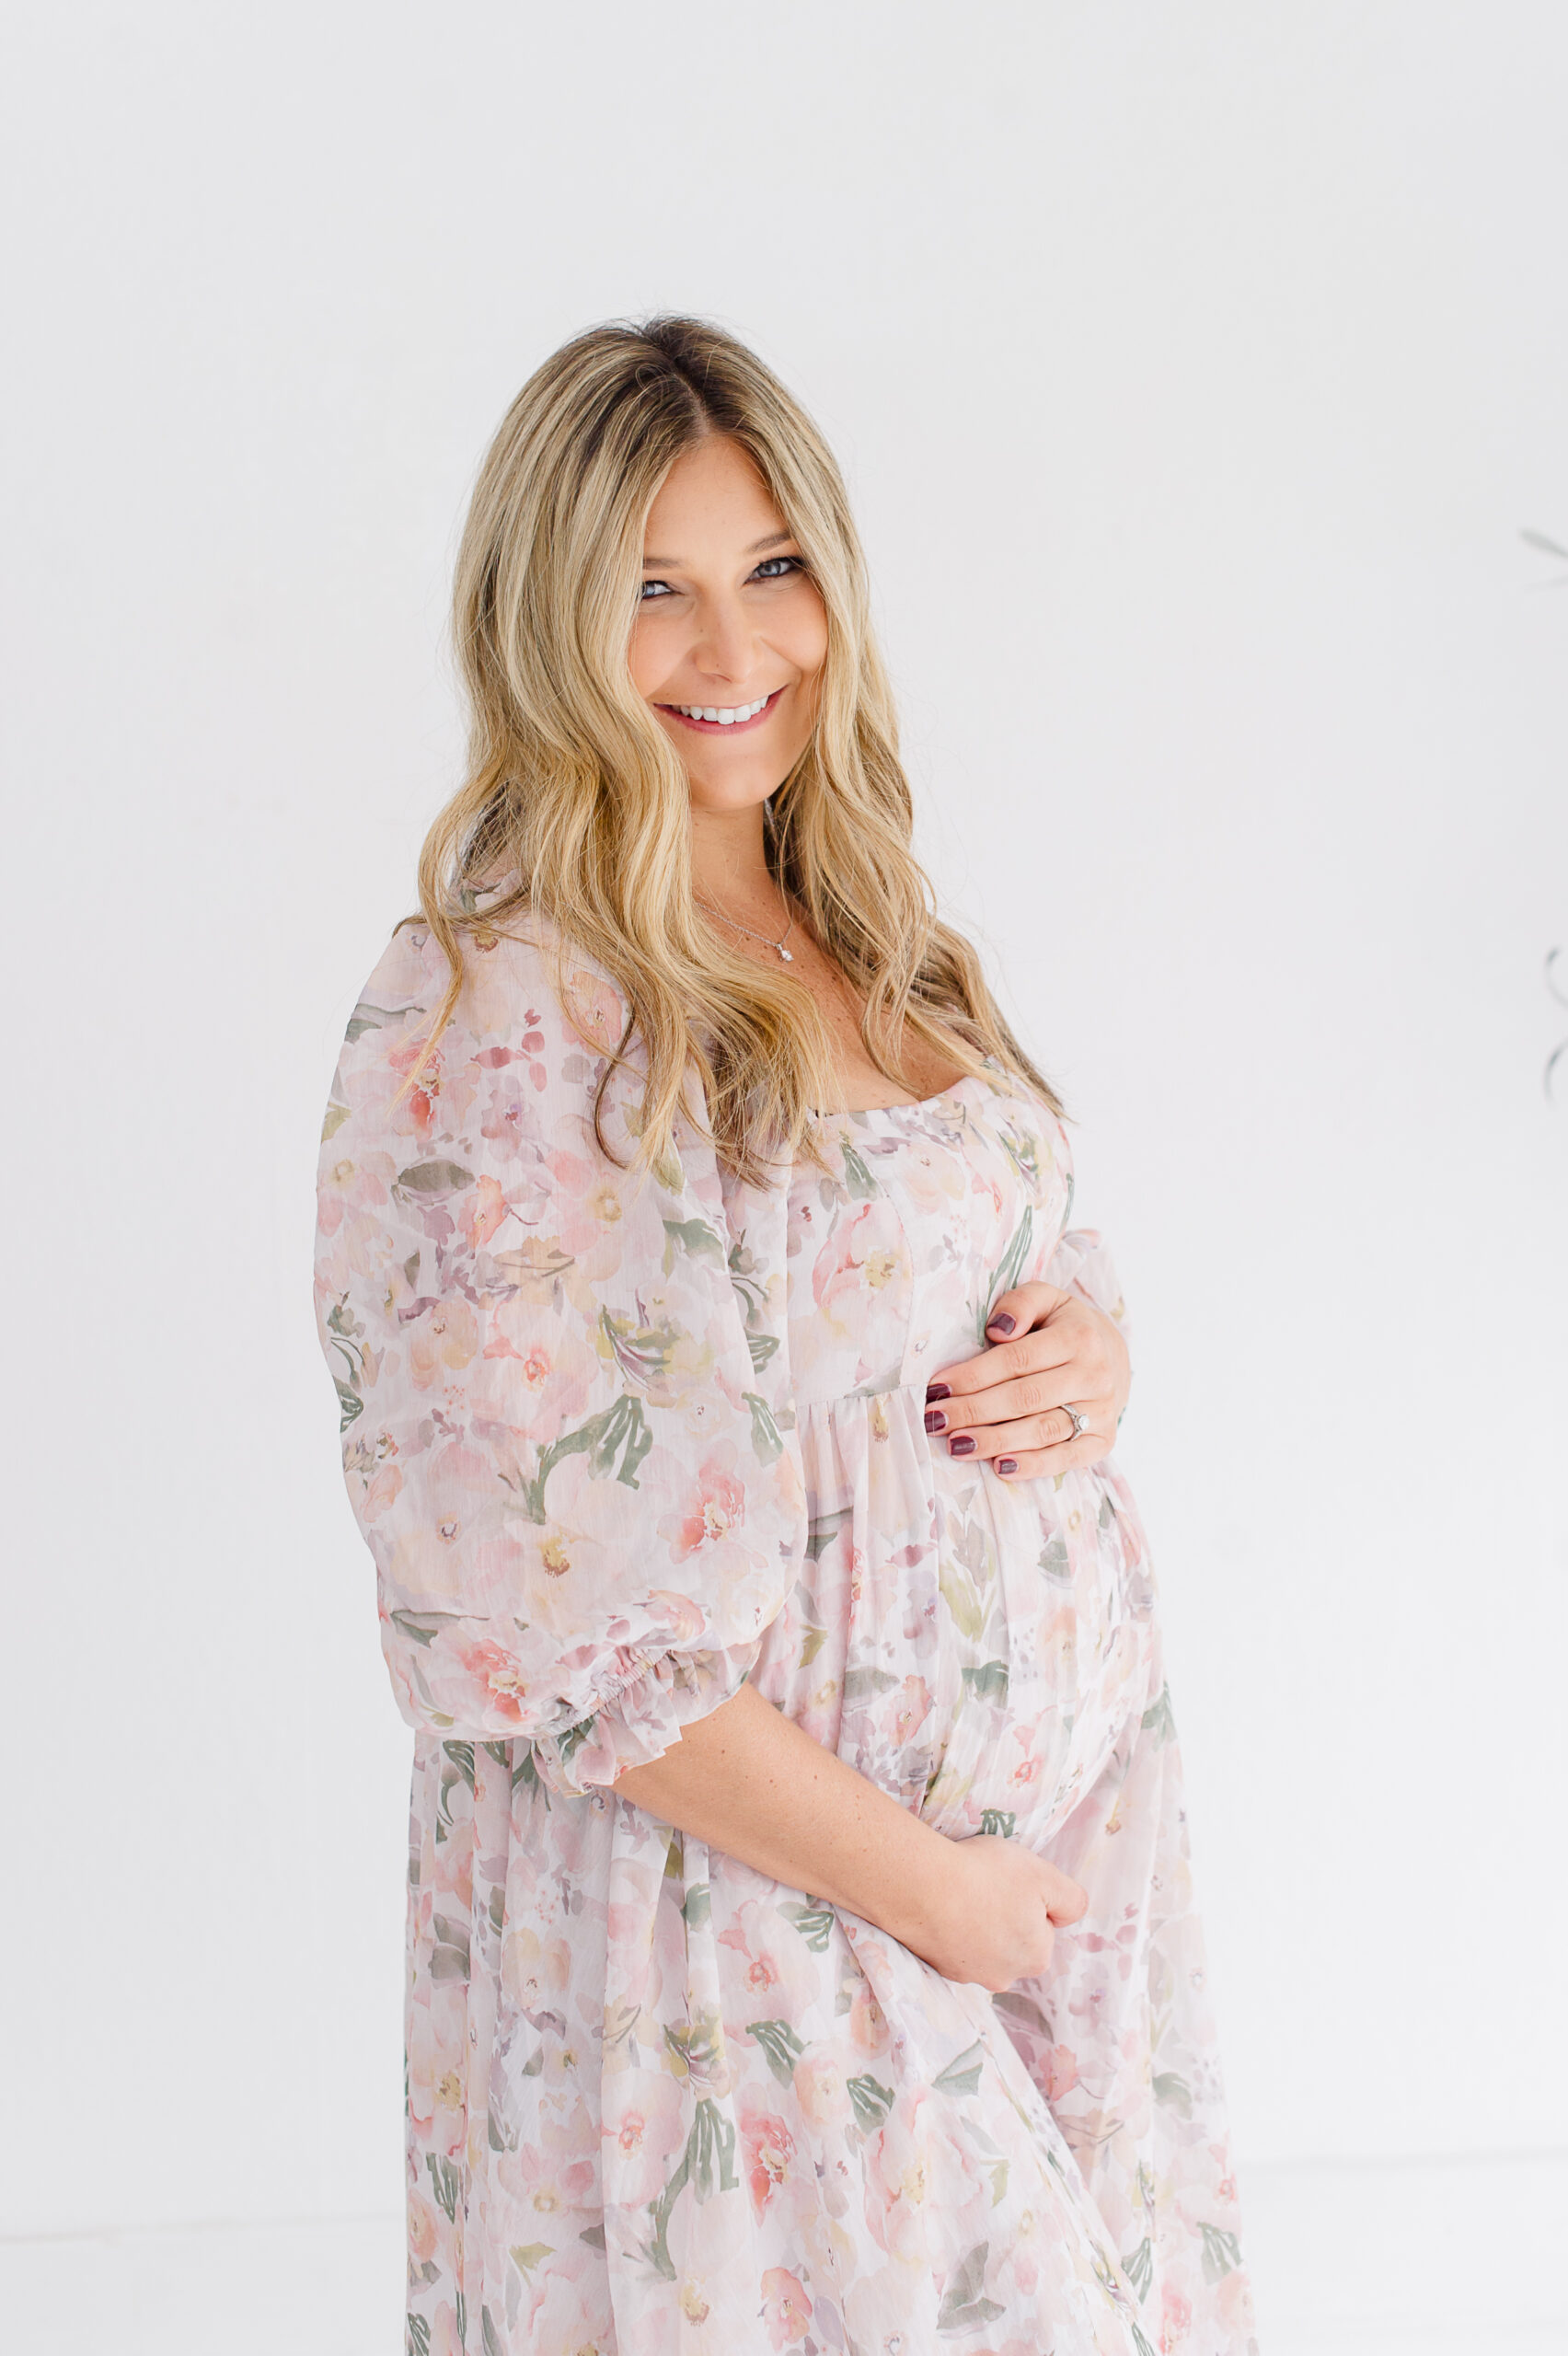 Expectant mother holding her belly and smiling at the camera baby boutiques Orlando